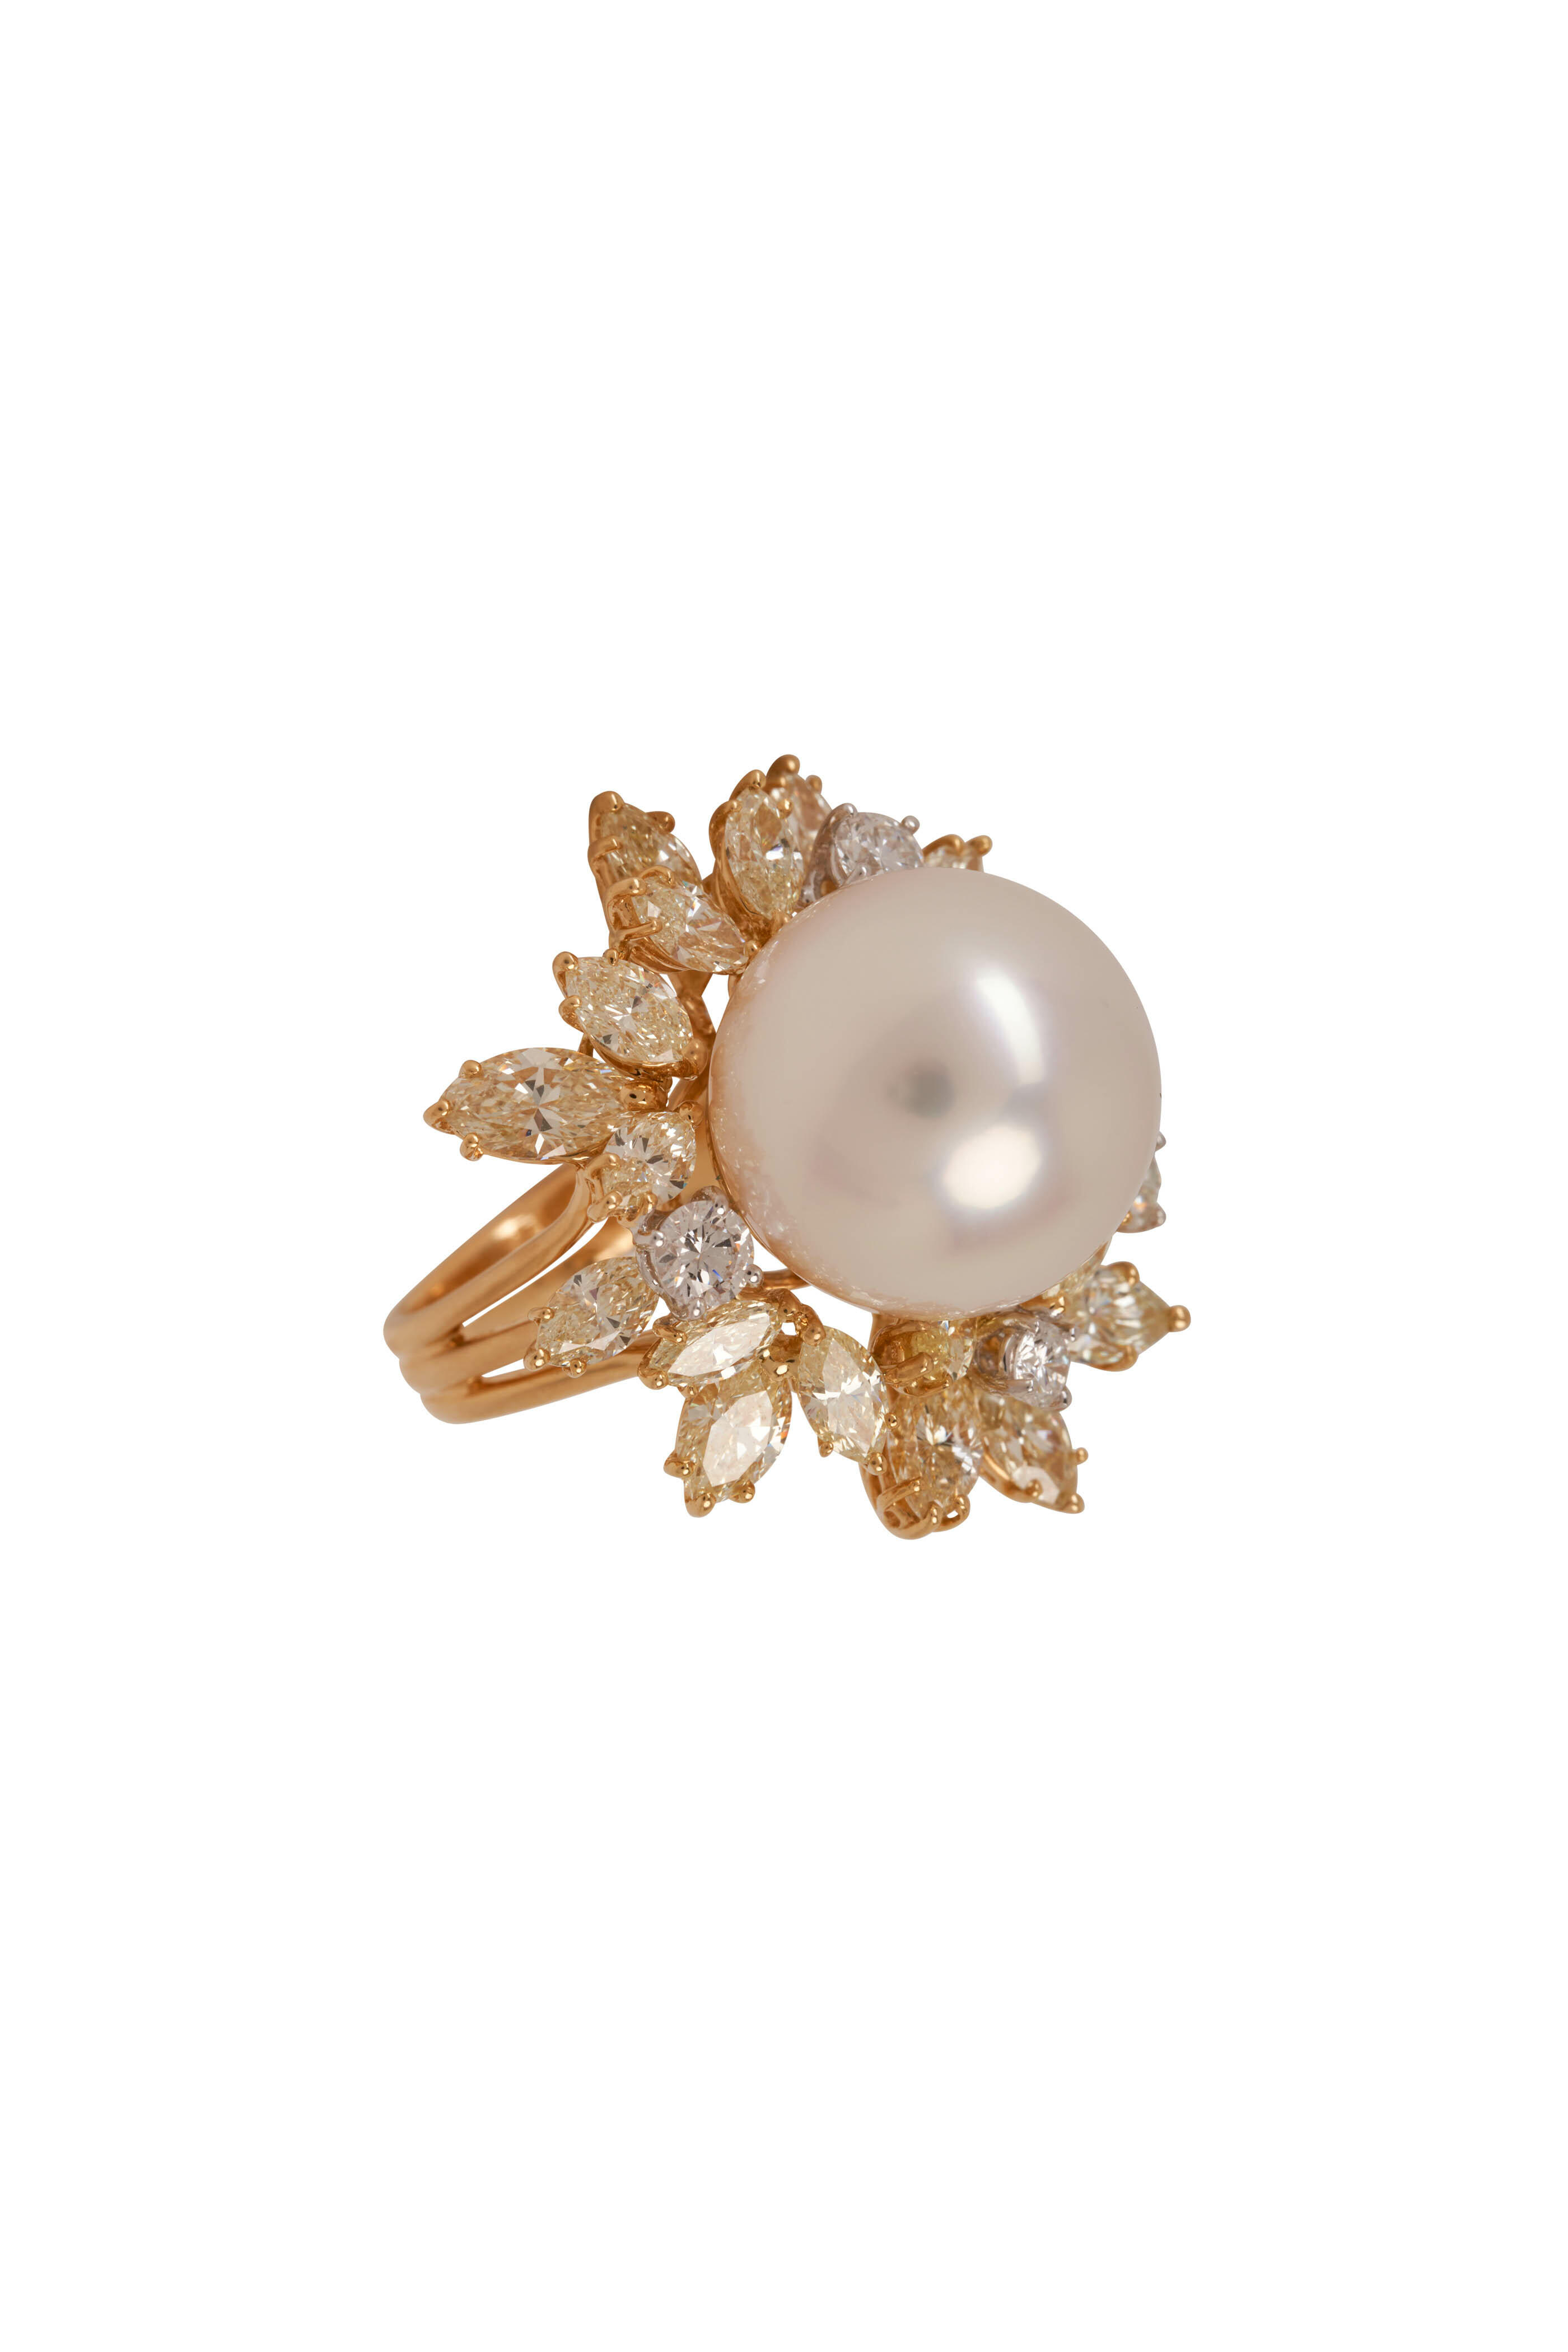 Style Spotlight: Cultured Pearl Engagement Rings